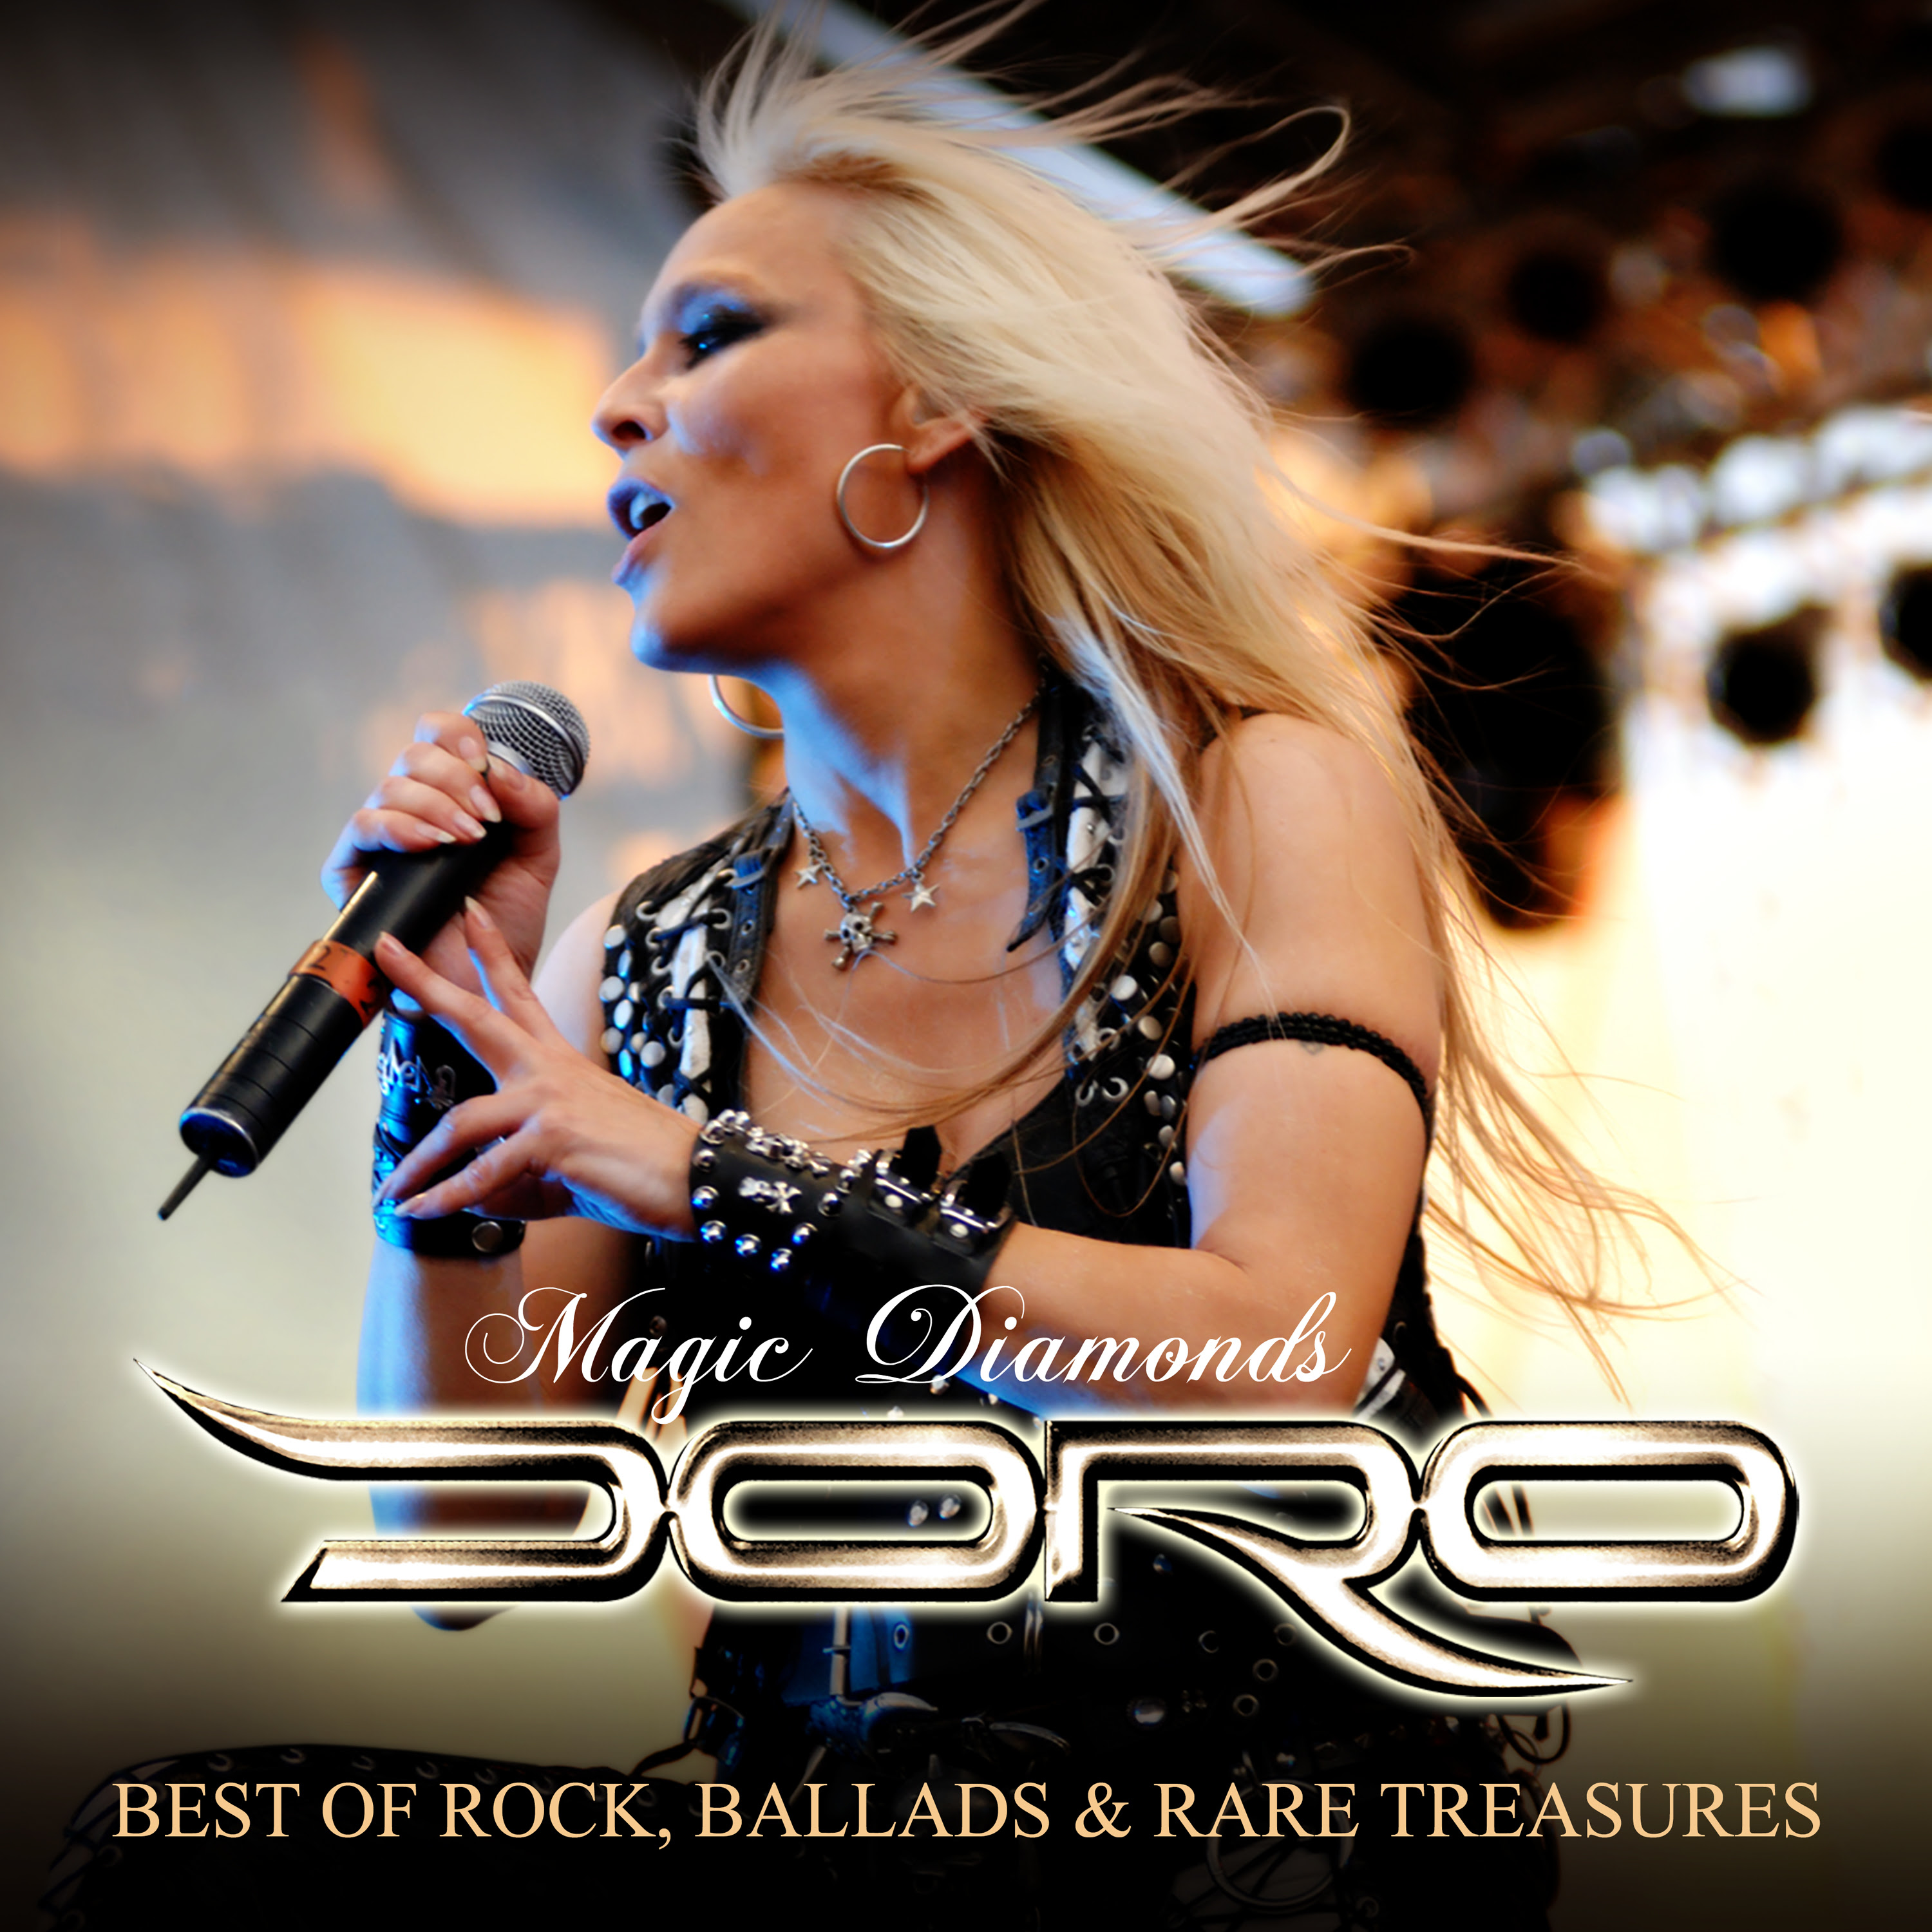 DORO to release special best-of boxset featuring nearly four hours of ...